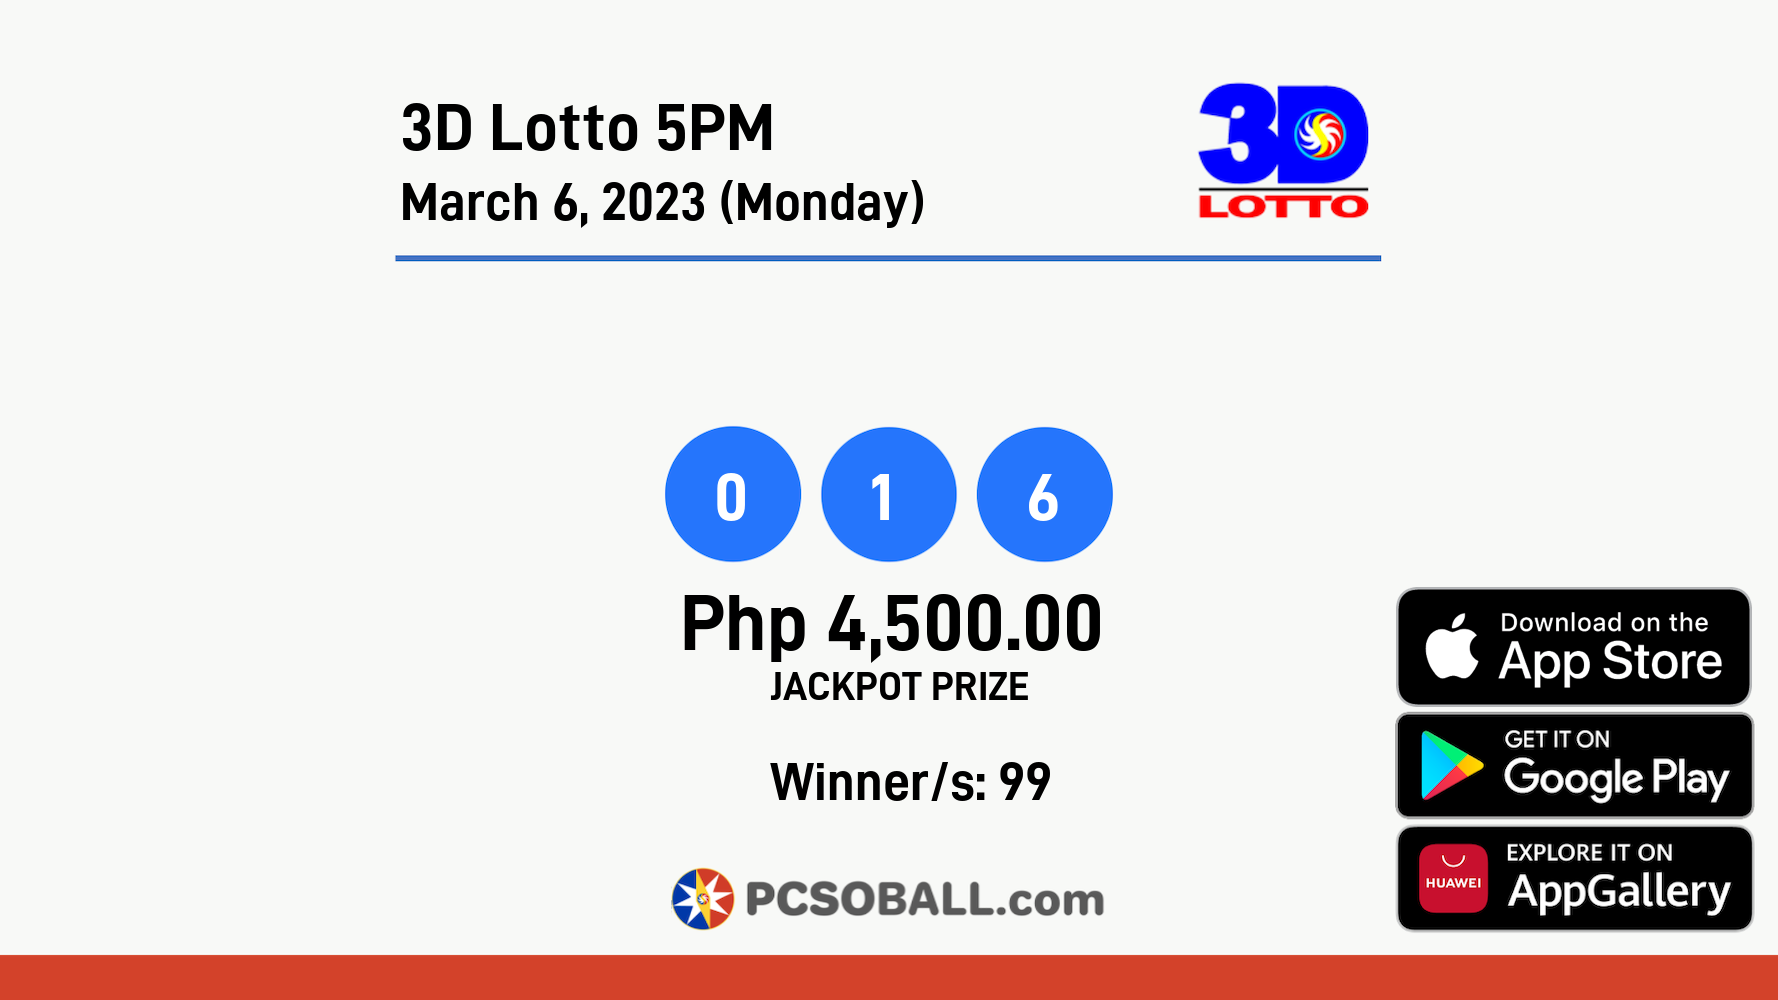 3D Lotto 5PM March 6, 2023 (Monday) Result